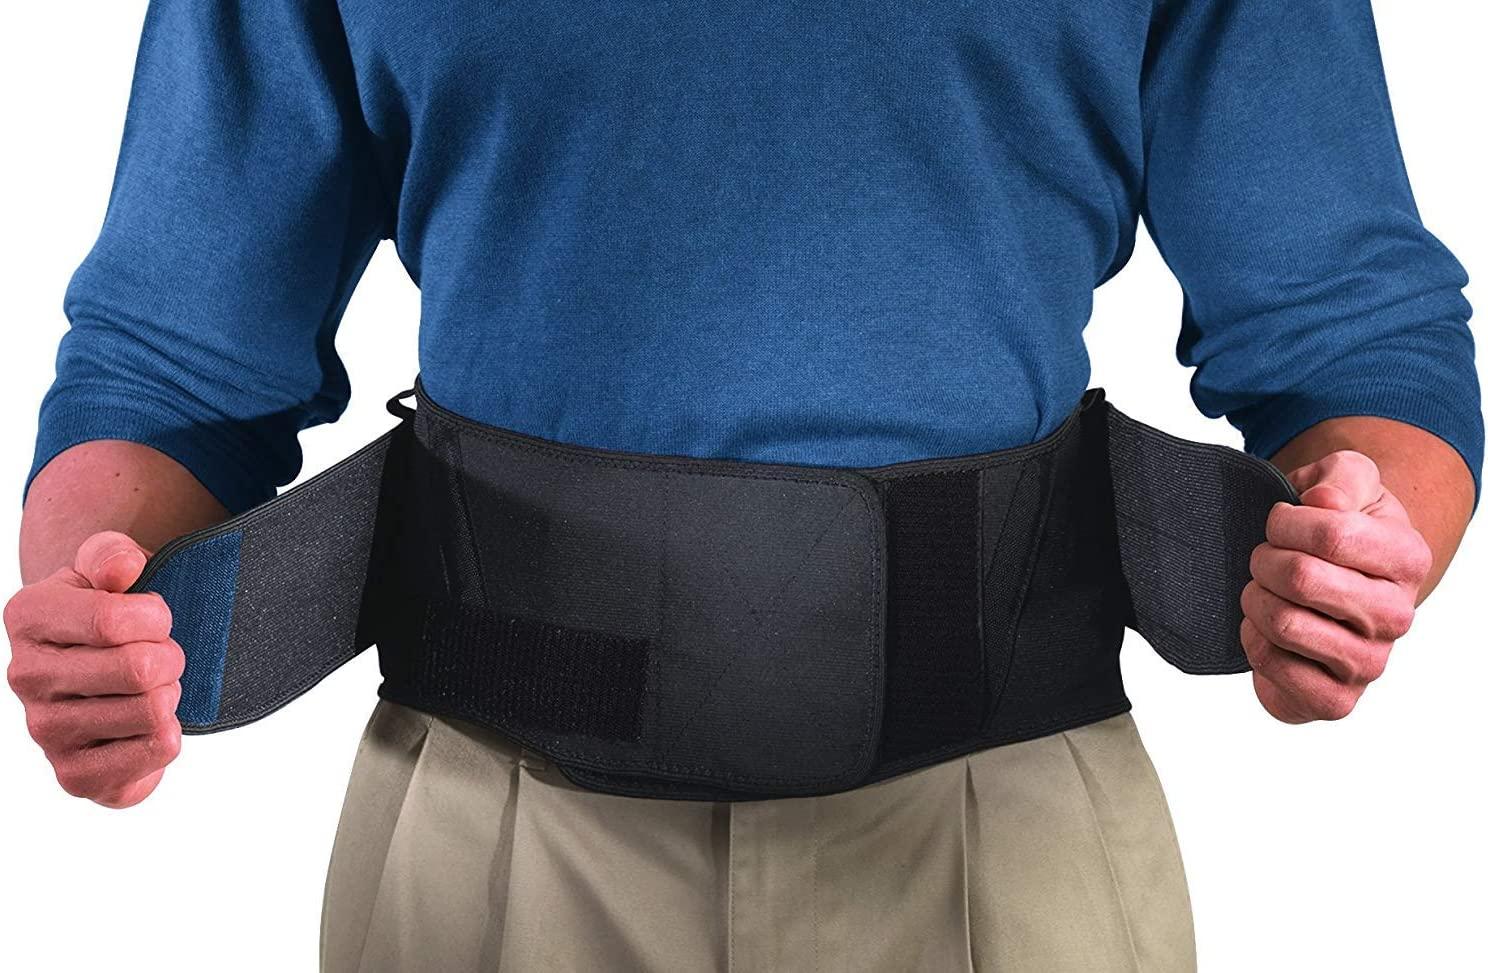 Mueller 255 Lumbar Support Back Brace with Removable Pad, Black,  Regular(Package May Vary) Regular (Pack of 1)